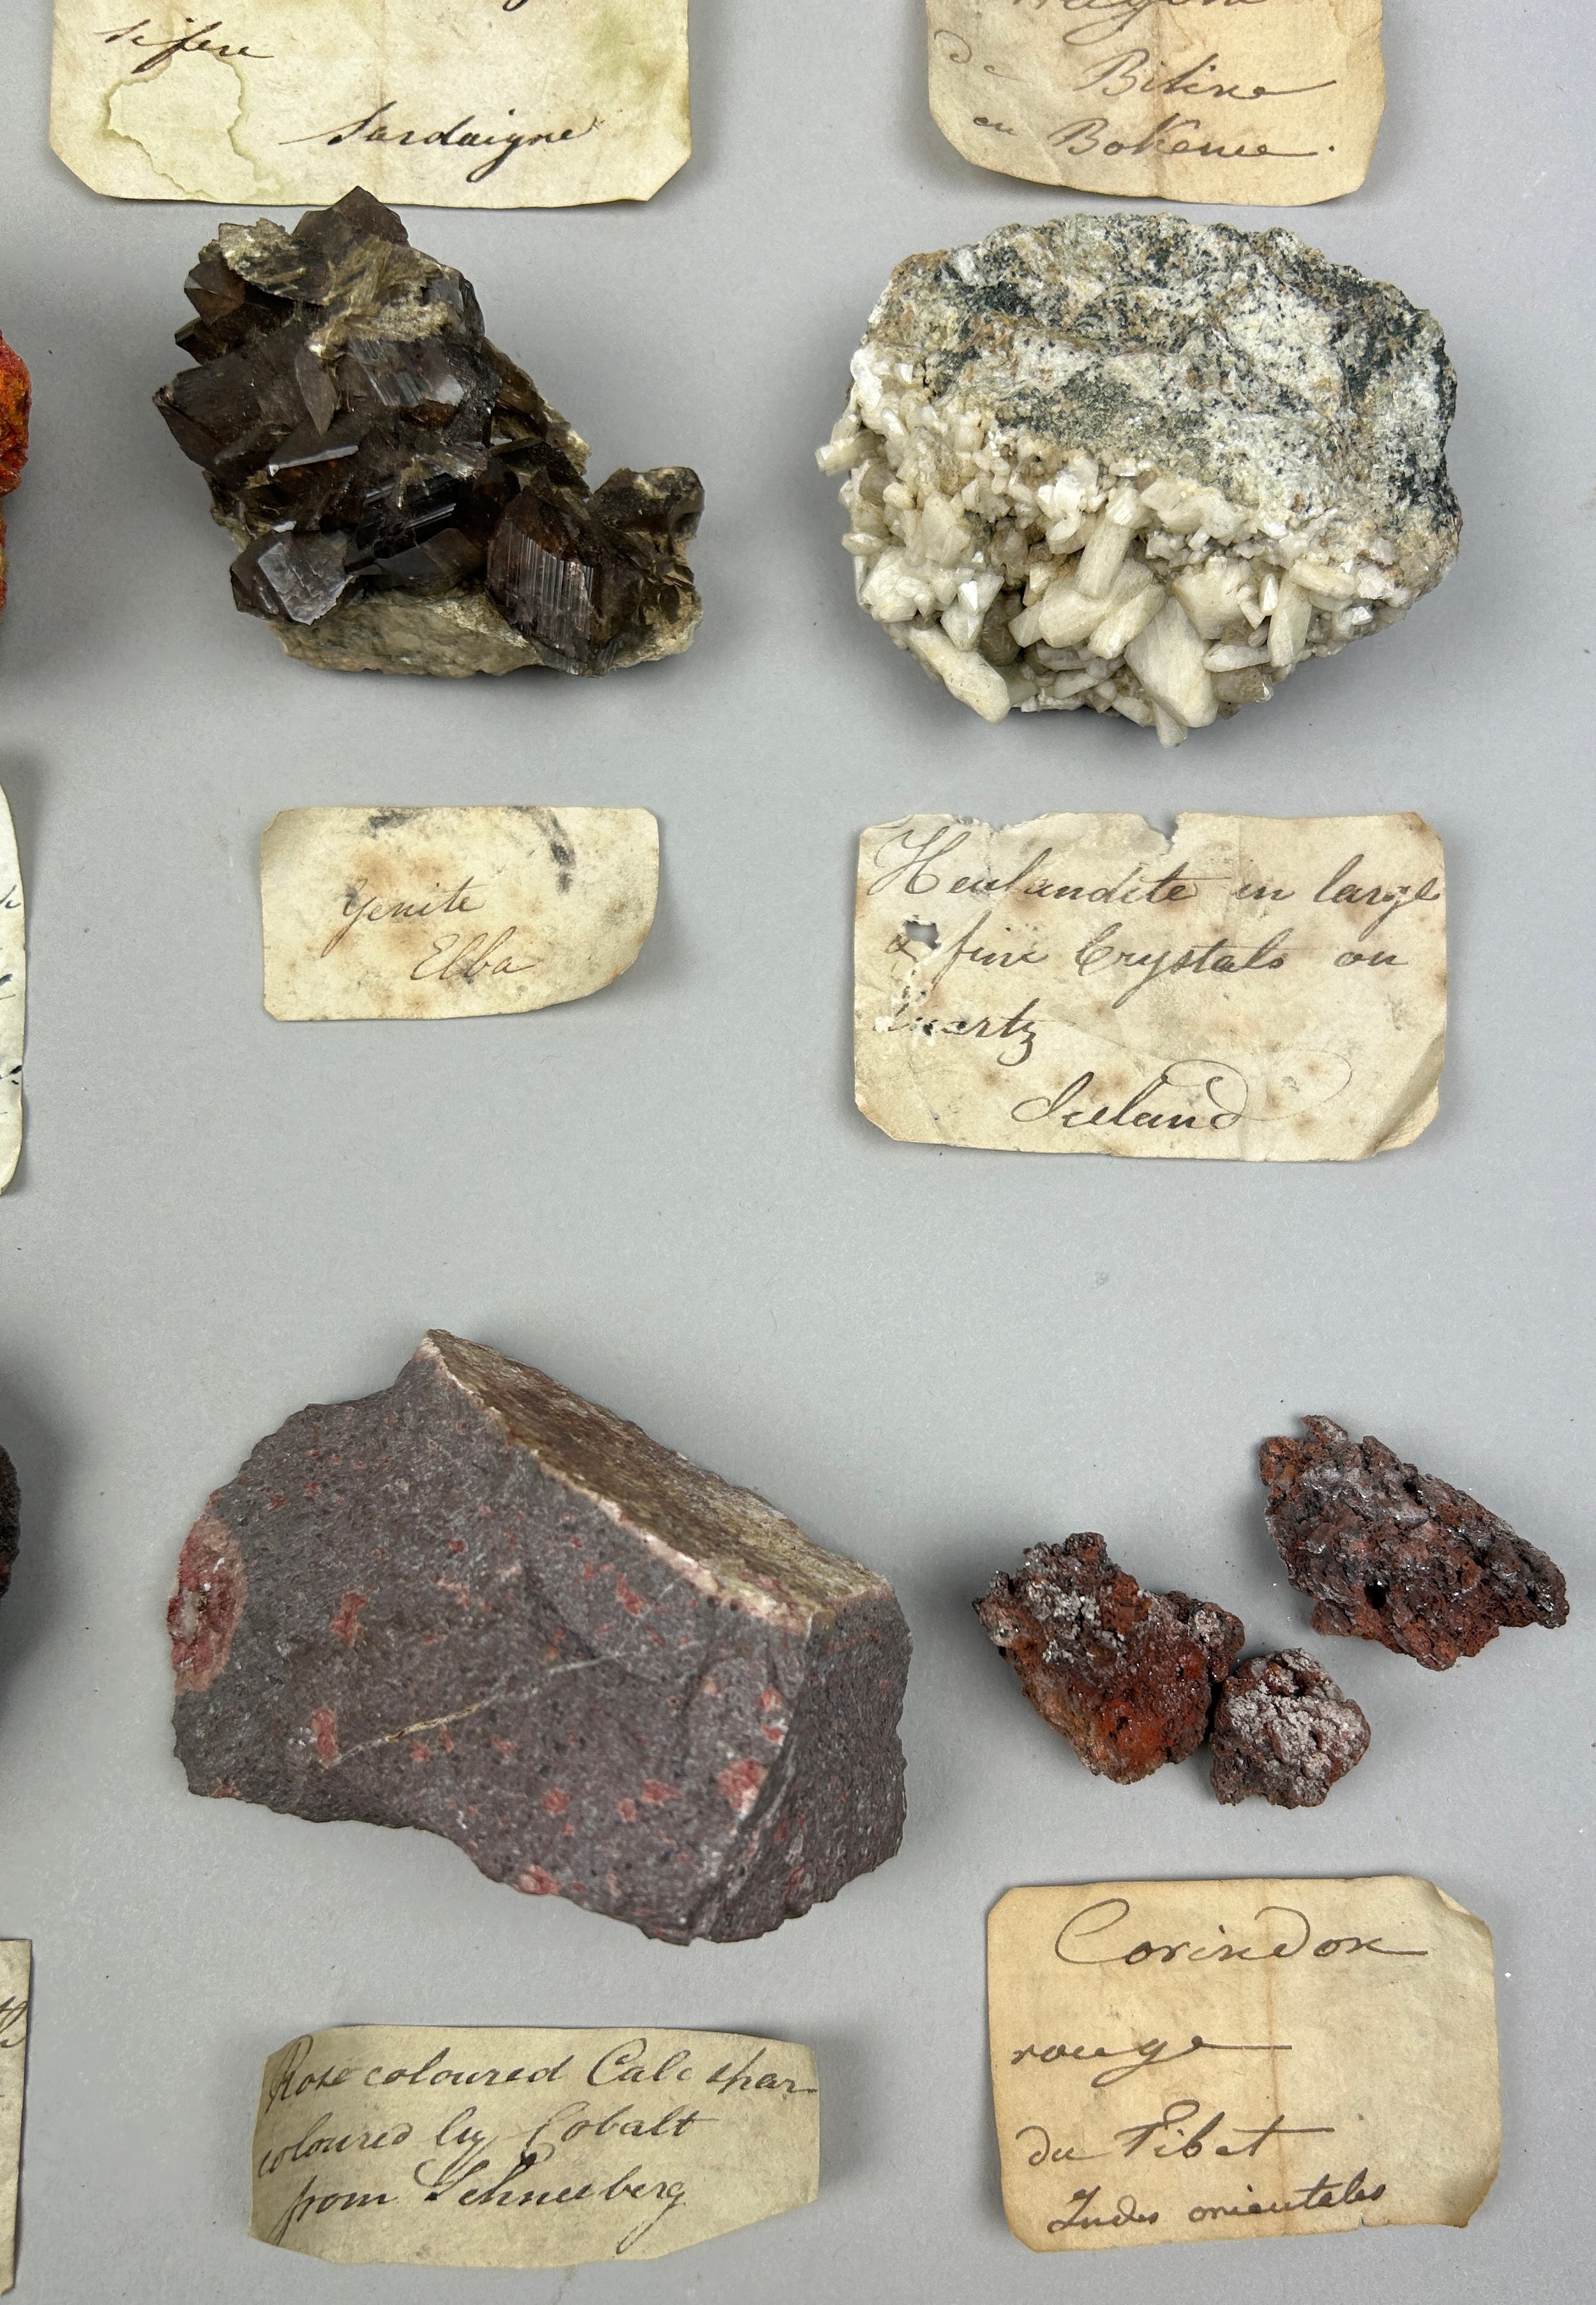 A RARE CABINET COLLECTION OF MINERALS CIRCA 1810-1860, including labels for some very important - Image 5 of 30